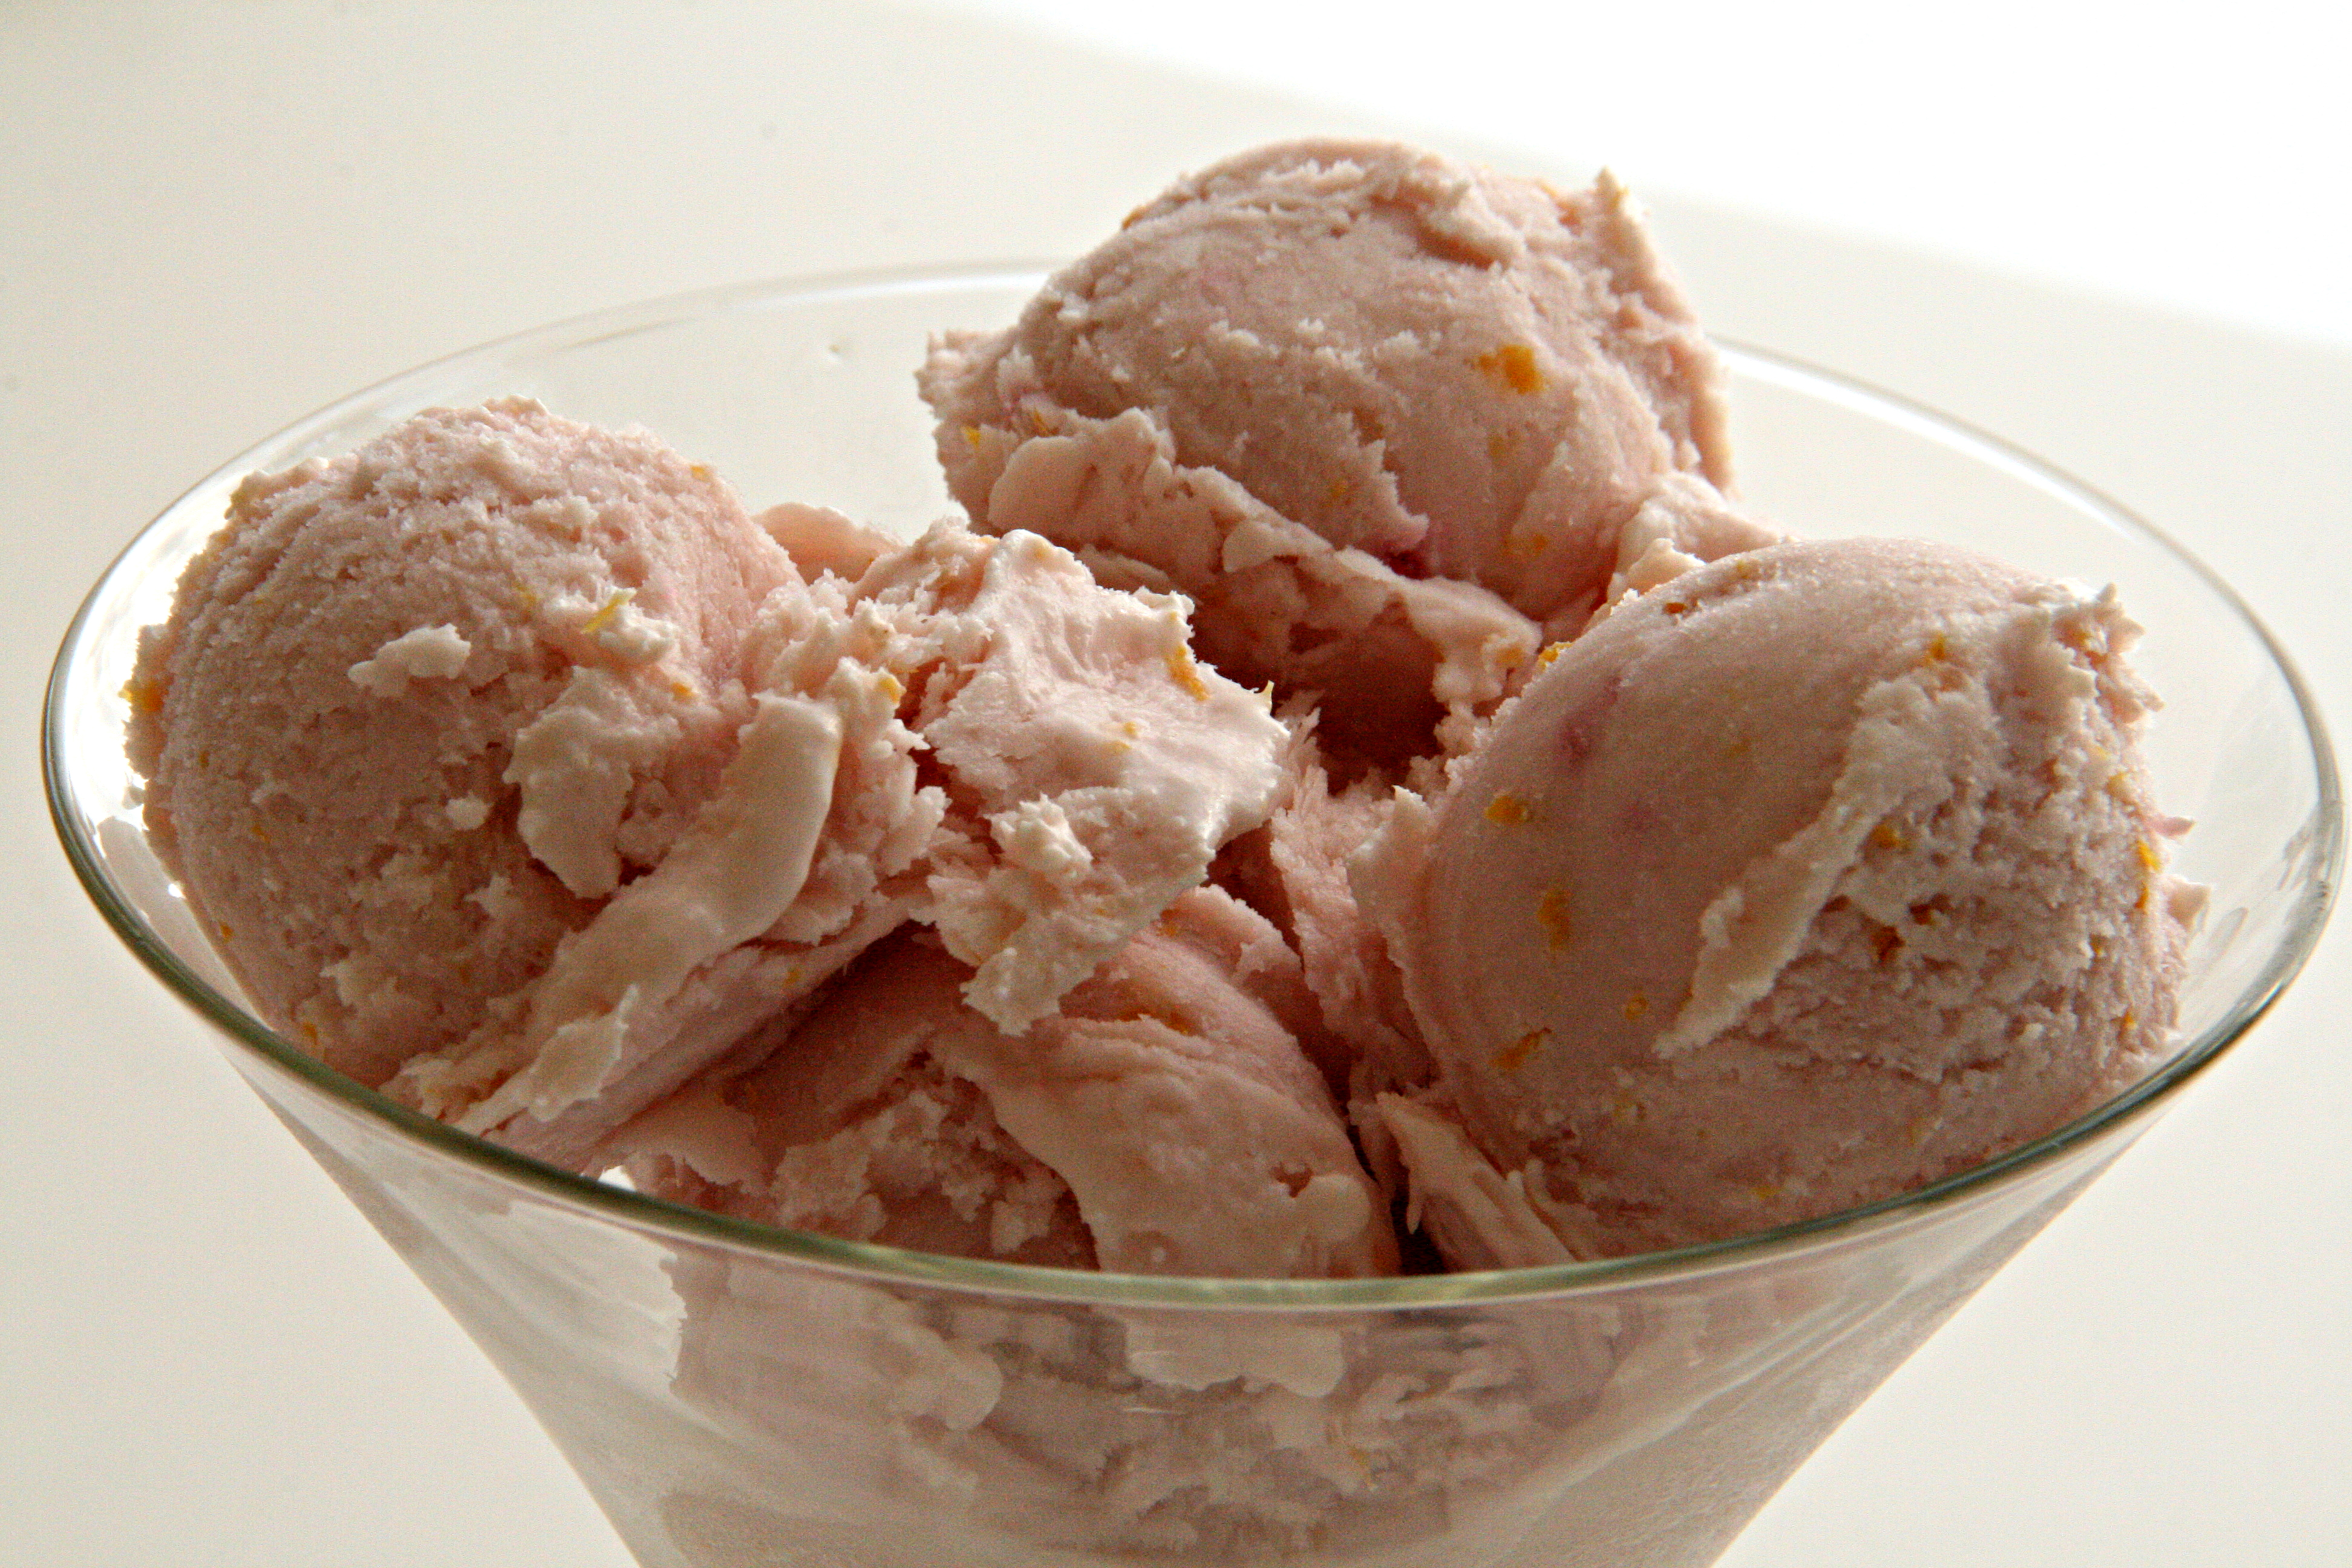 Small scoops of light pink blood orange ice cream in a clear glass bowl